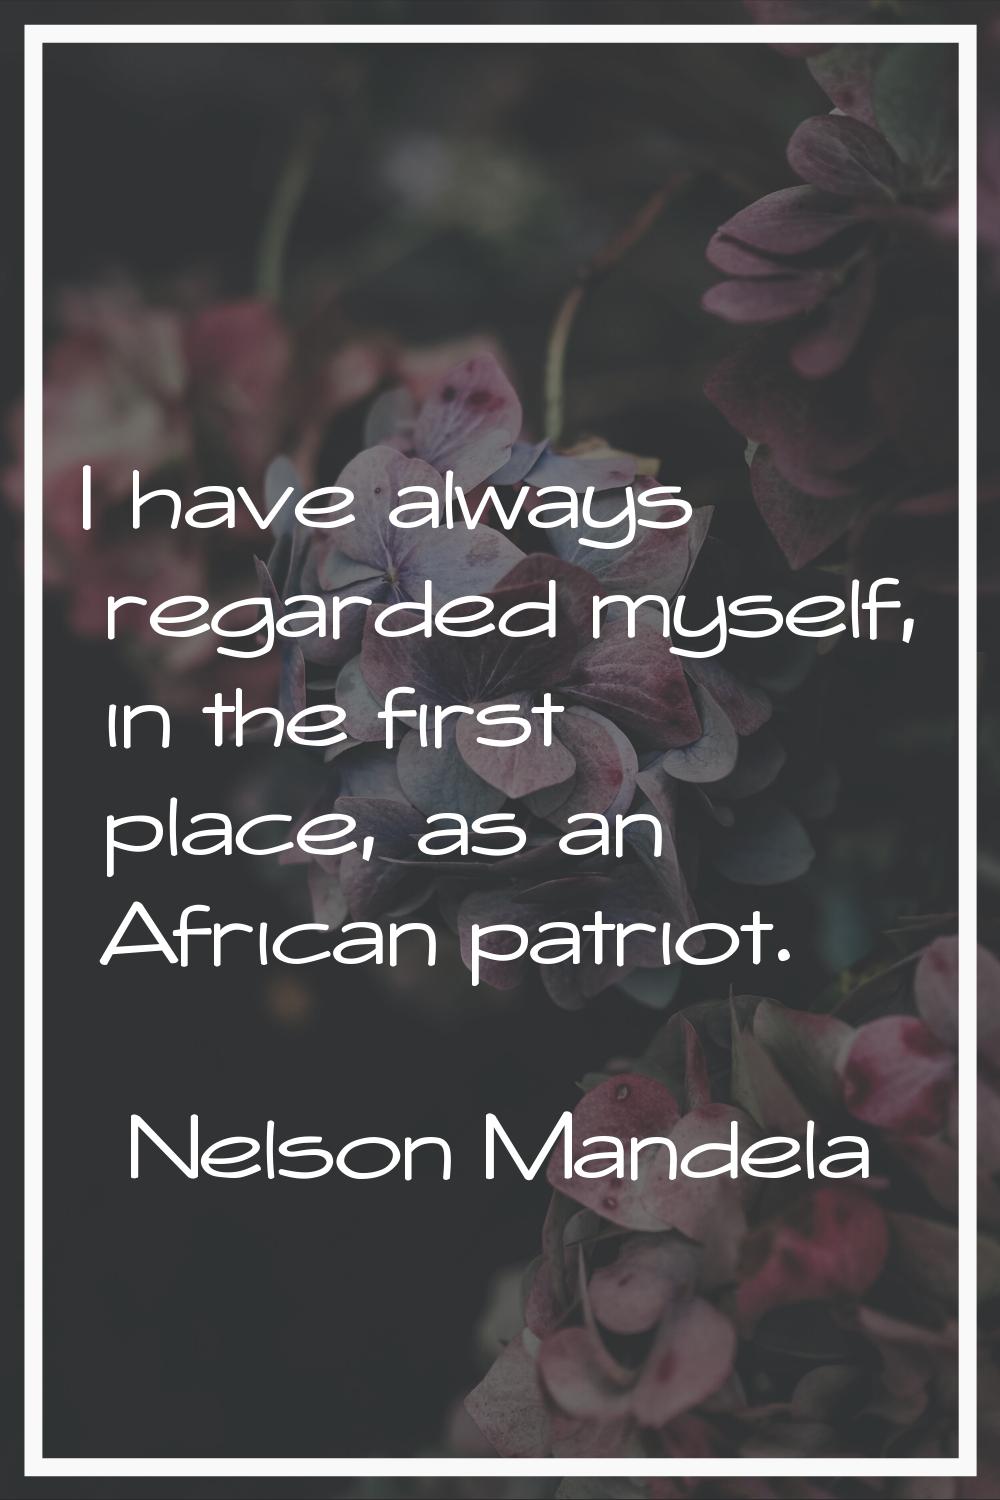 I have always regarded myself, in the first place, as an African patriot.